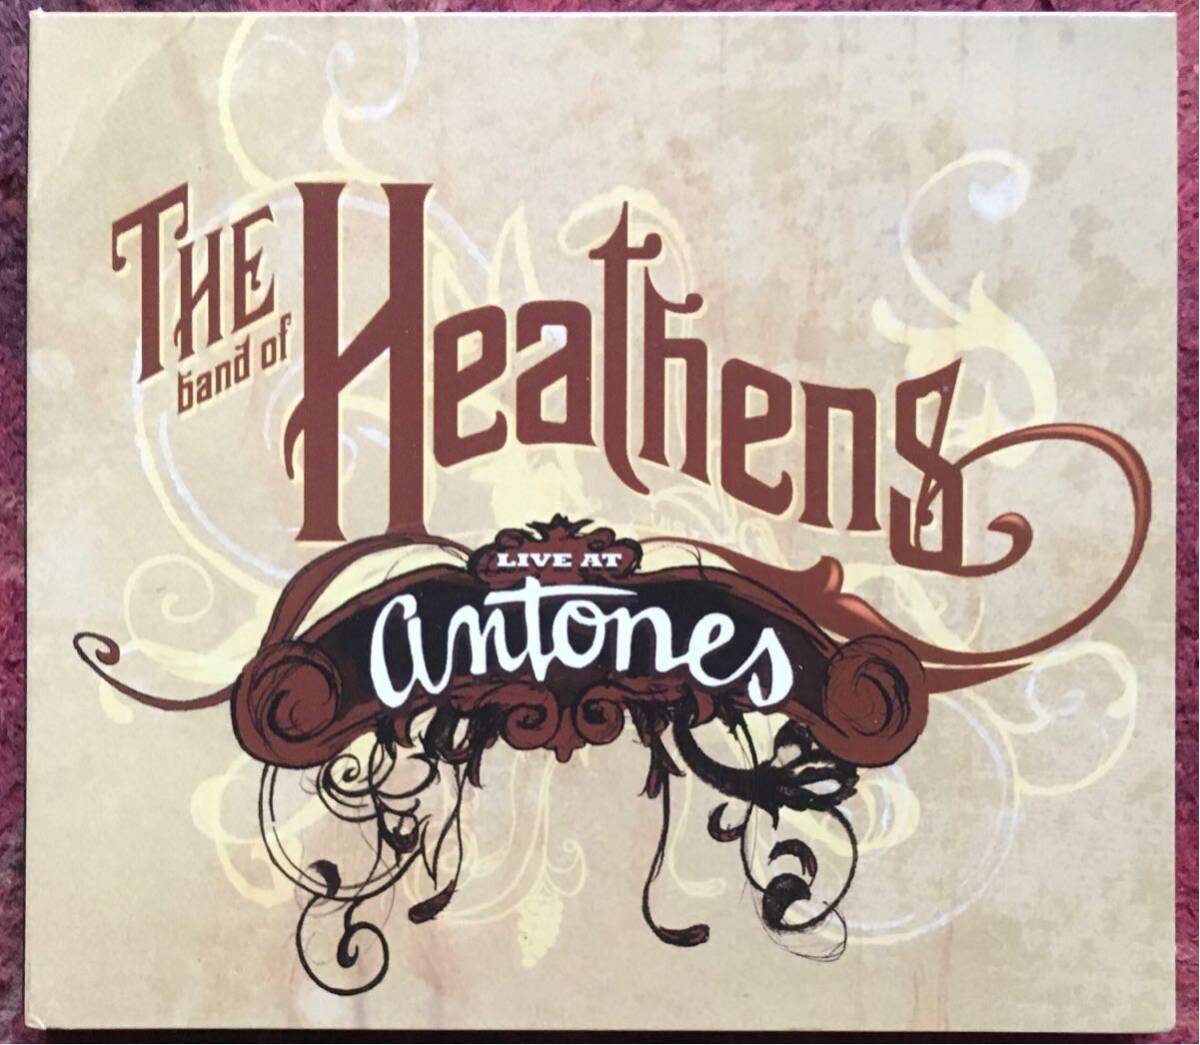 The Band of Heathens [Live at Antones] (CD+DVD) テキサス / フォークロック / カントリーロック / スワンプ / アメリカーナの画像1